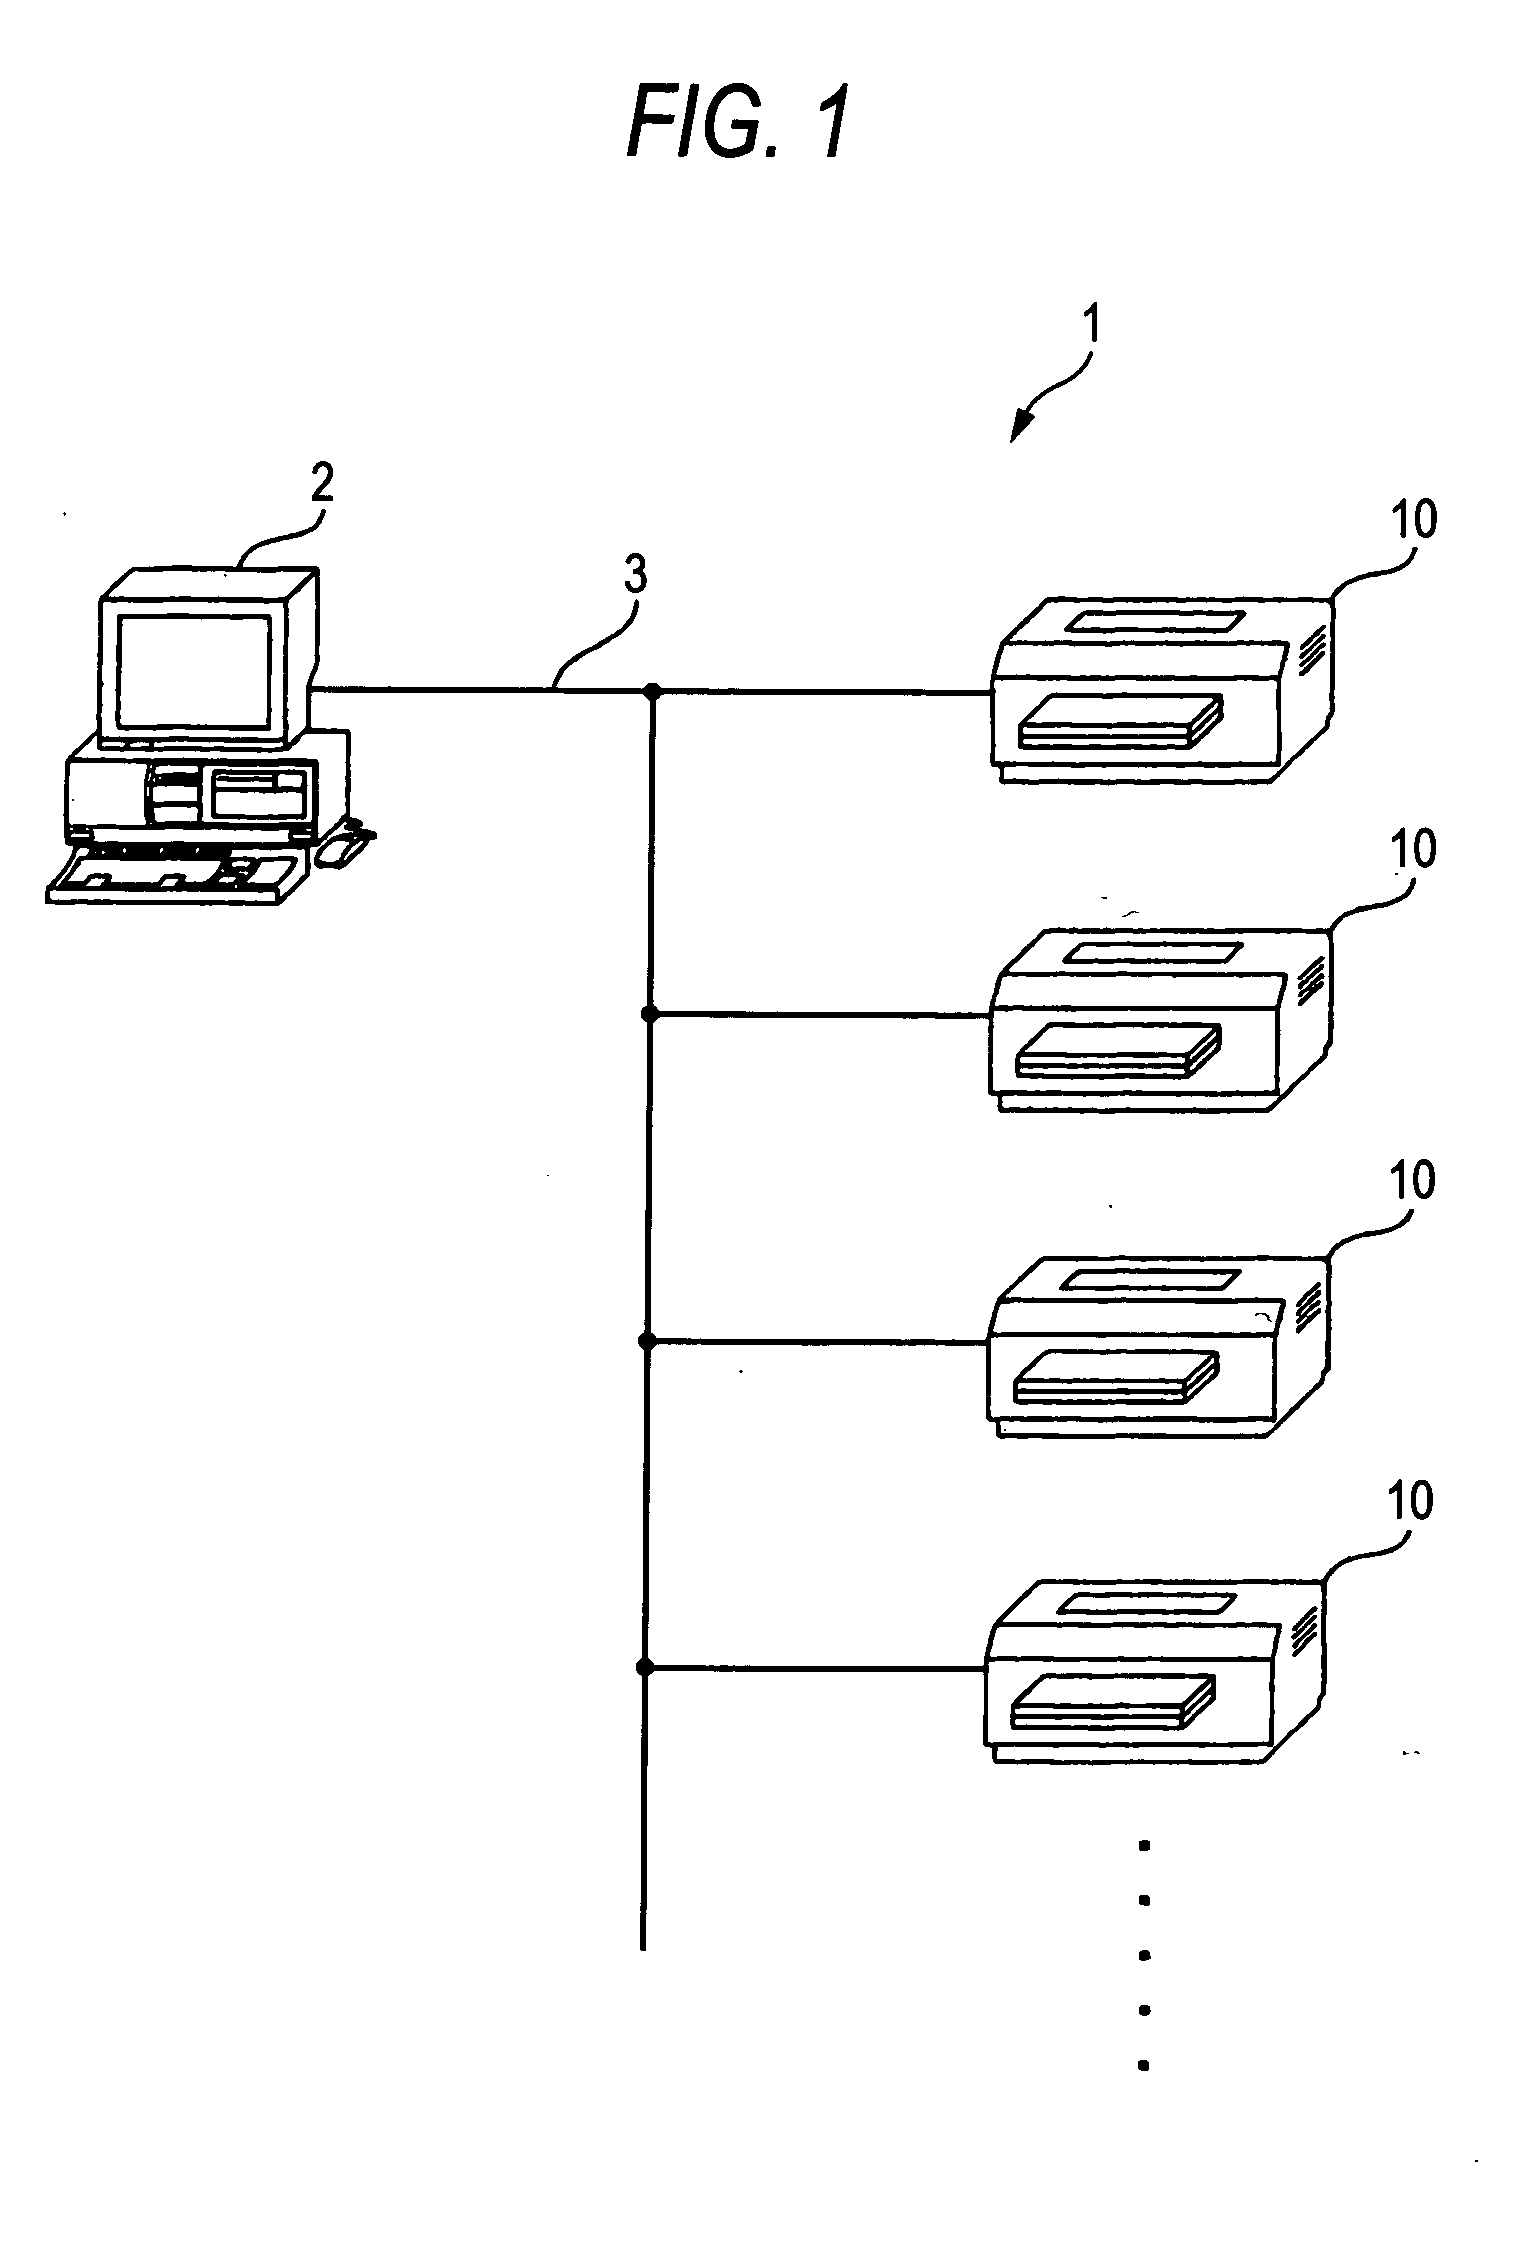 Image formation apparatus to which replacement unit is attached and image formation system